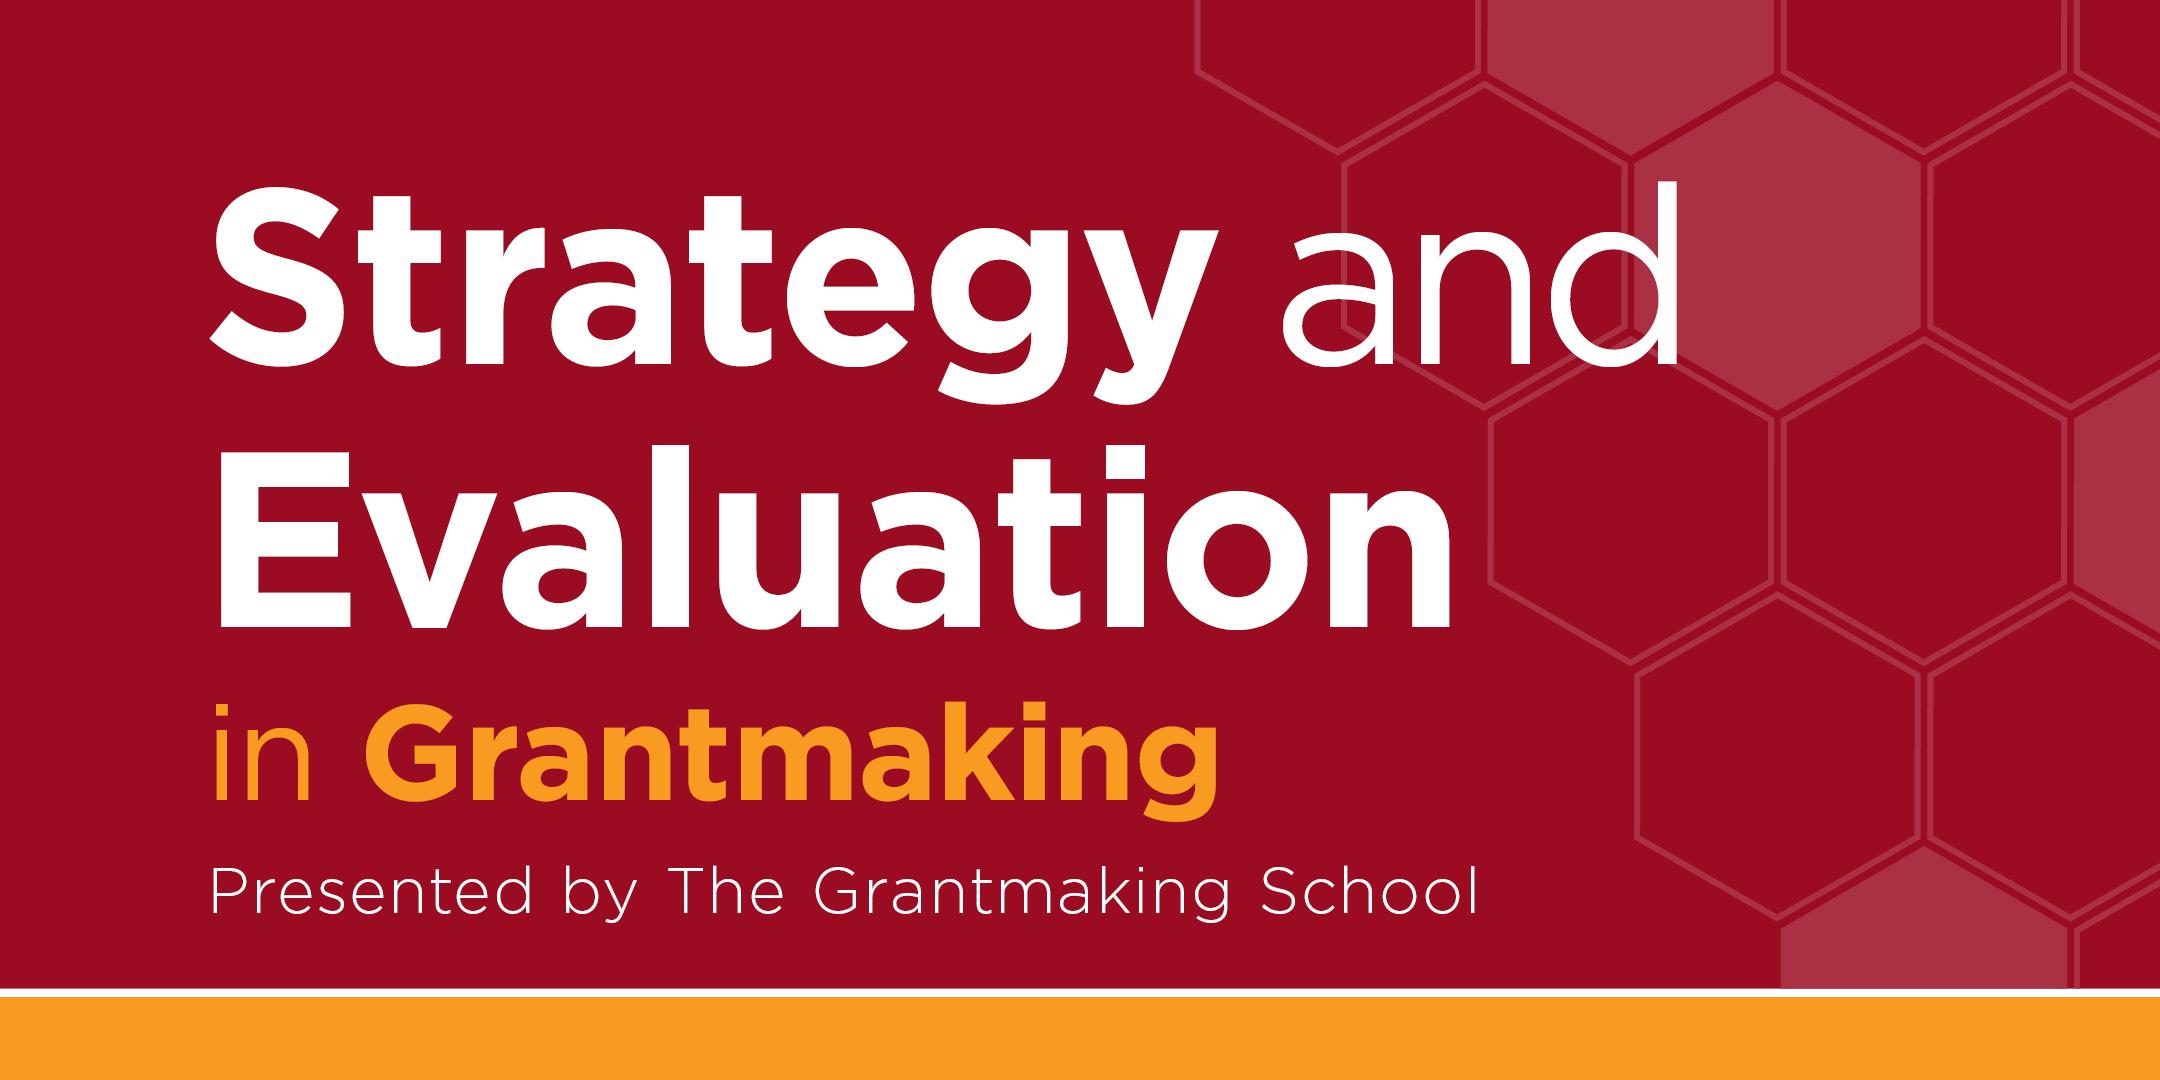 Strategy and Evaluation in Grantmaking